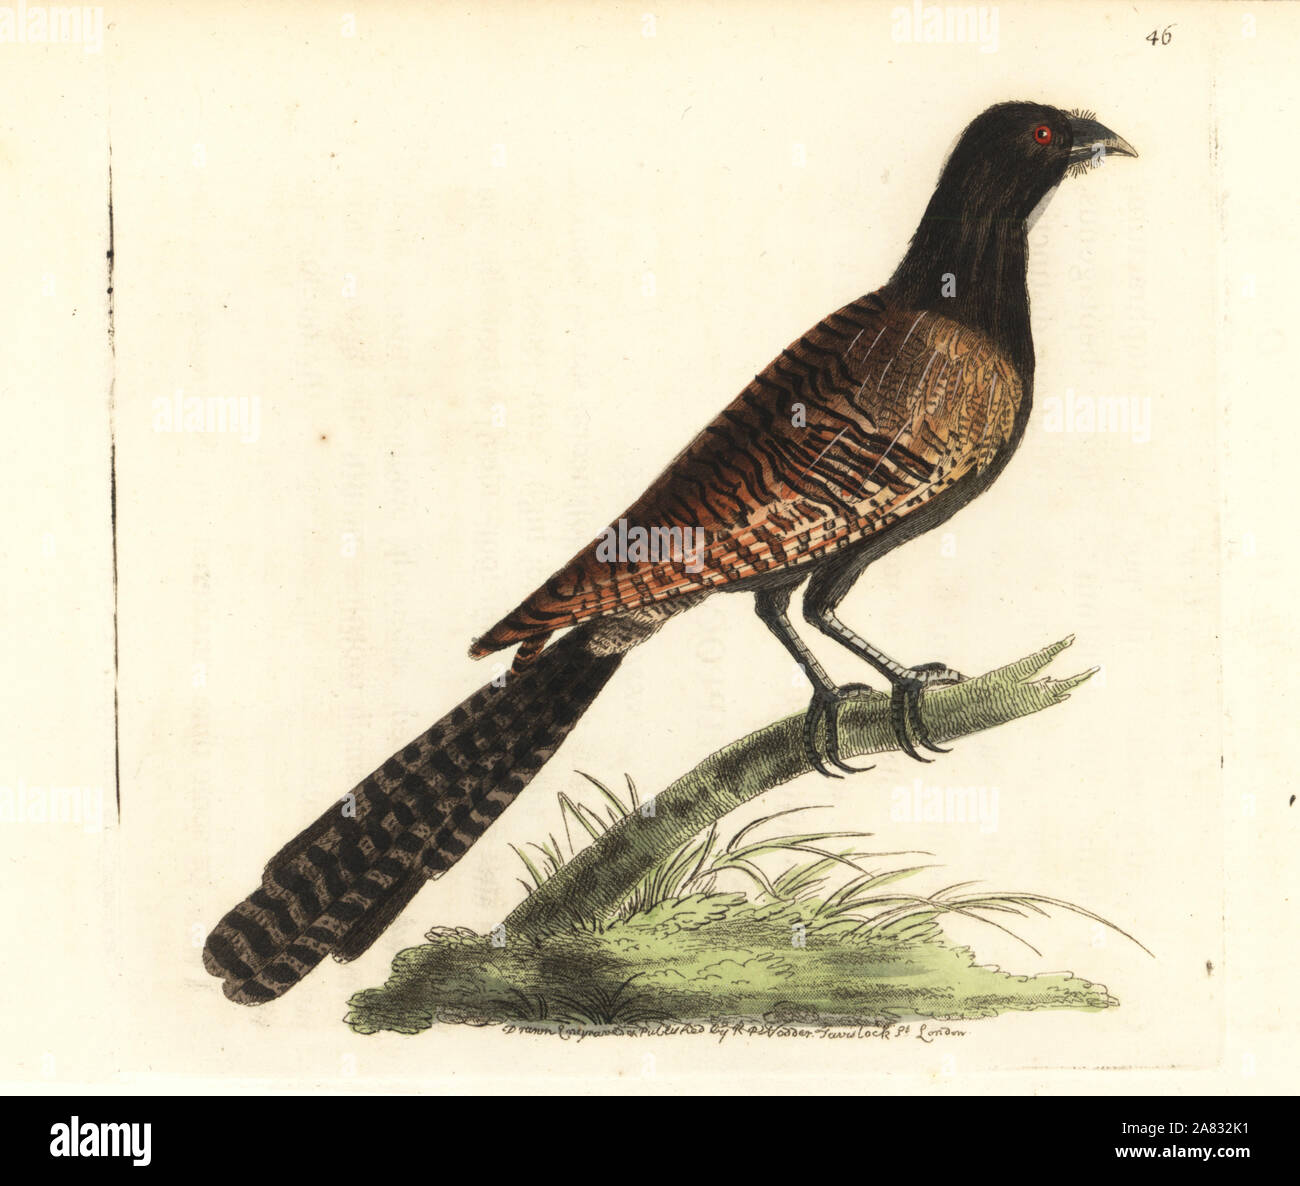 Pheasant coucal, Centropus phasianinus (Polophilus phasianus). Handcoloured copperplate engraving drawn and engraved by Richard Polydore Nodder from William Elford Leach's Zoological Miscellany, McMillan, London, 1814. Stock Photo